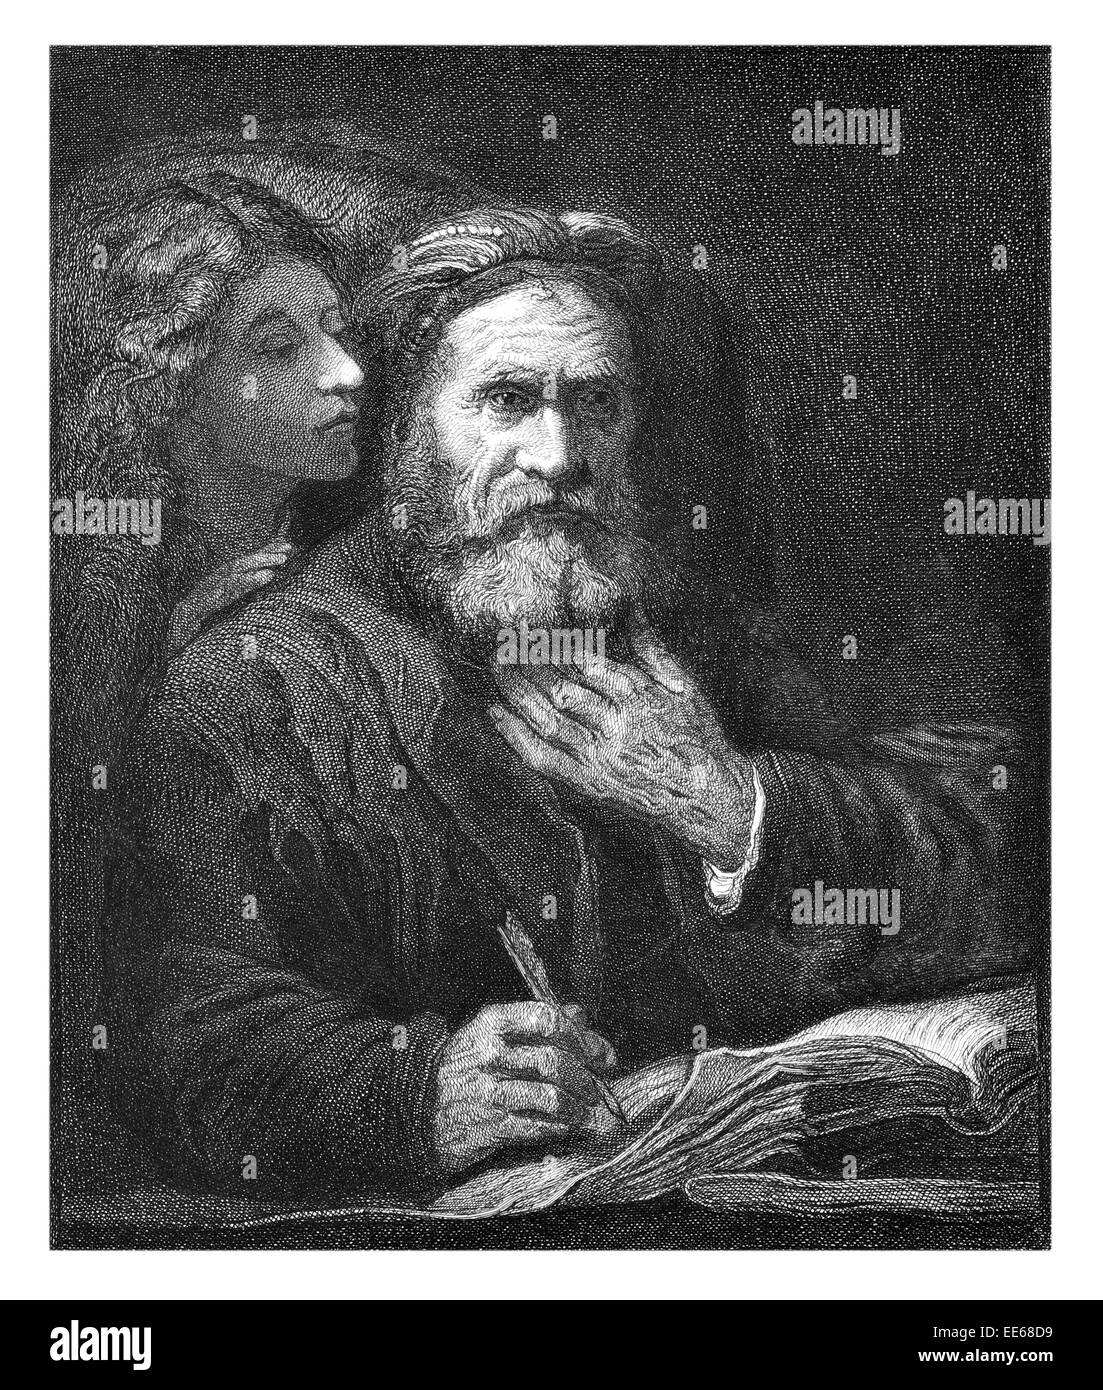 The Philosopher Rembrandt Harmenszoon van Rijn philosophy though thinking ponder pondering think philosophical period costume Stock Photo